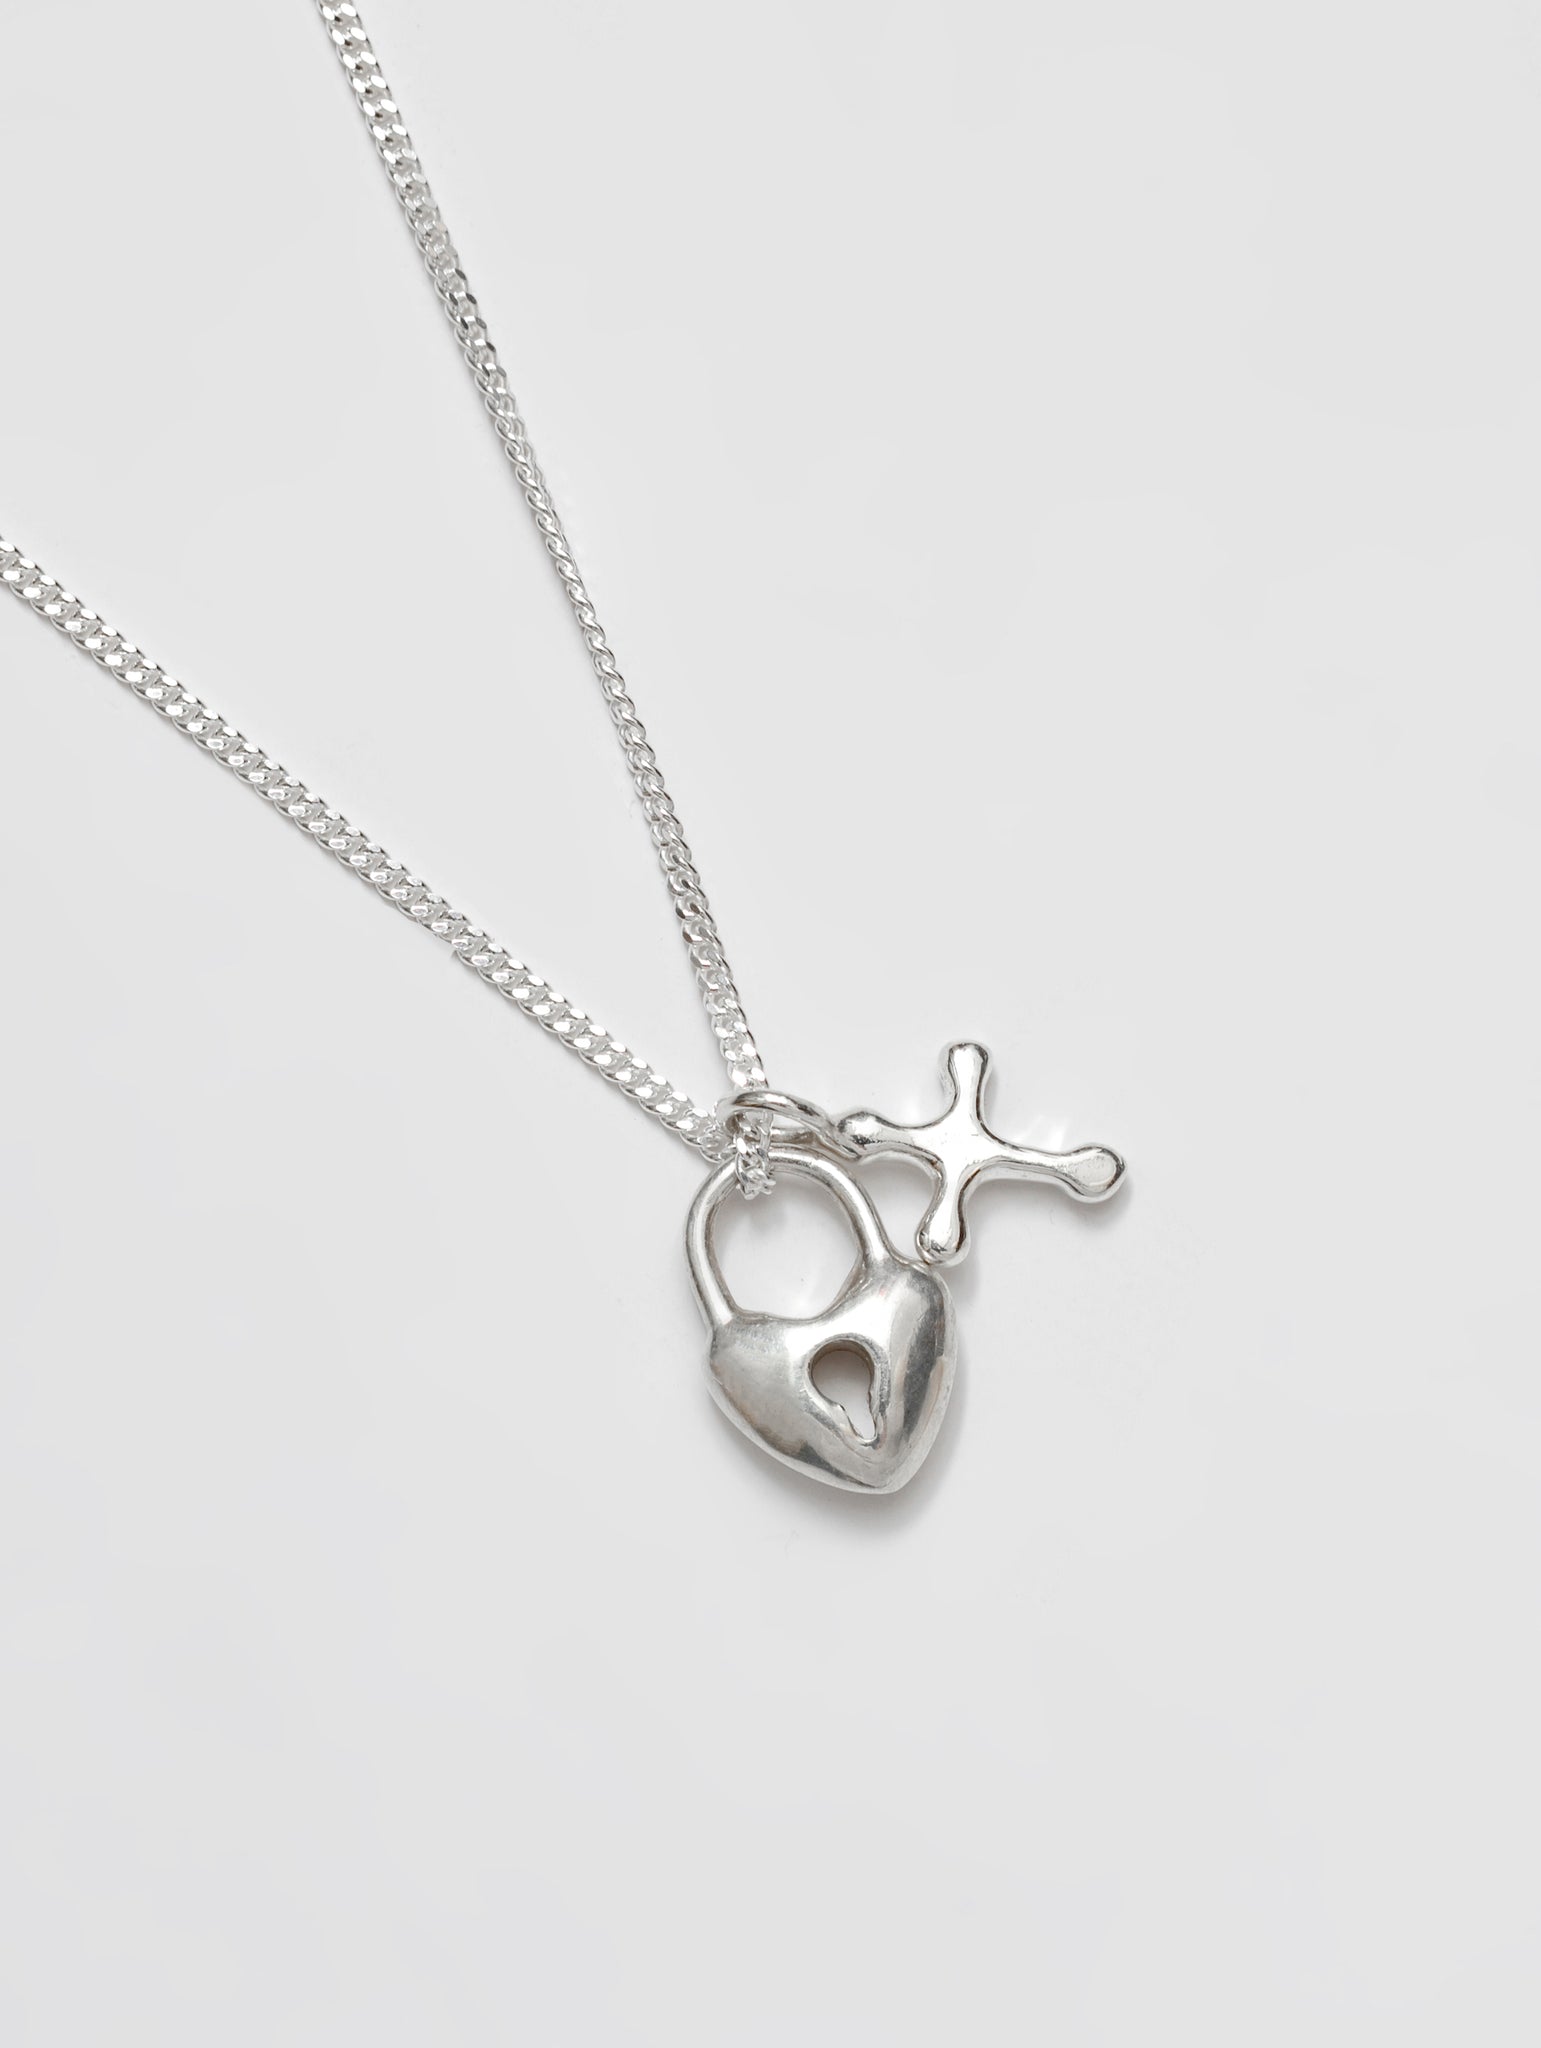 Mini Heart Lock and Cross Charm Necklace in Sterling Silver